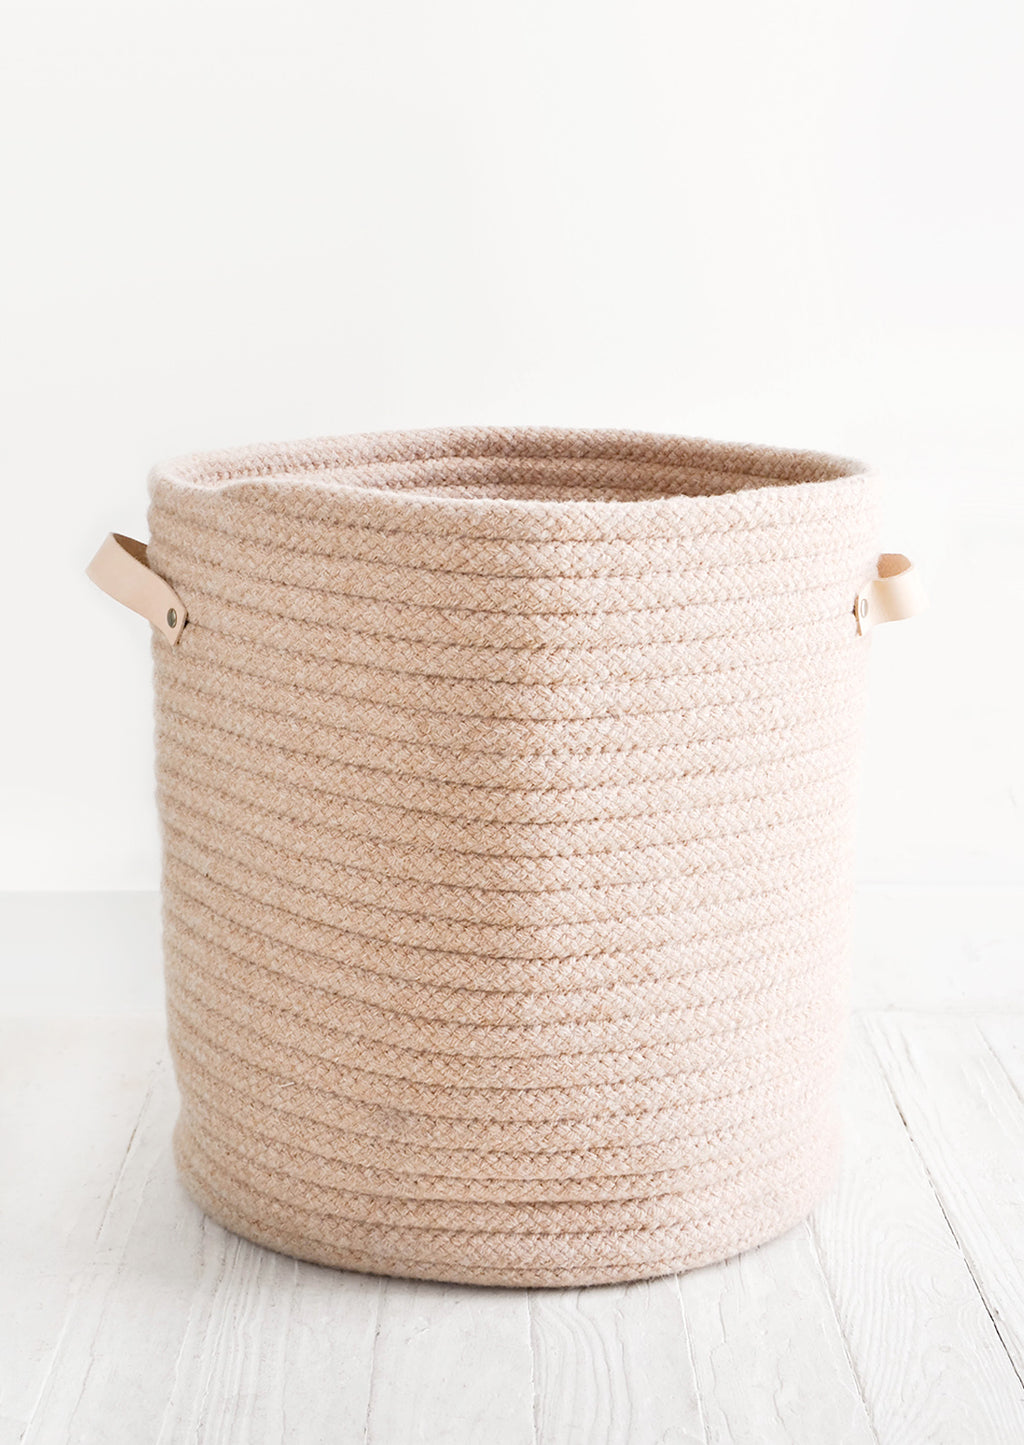 Large / Nude: Wooly Storage Bin with Leather in Large / Nude - LEIF